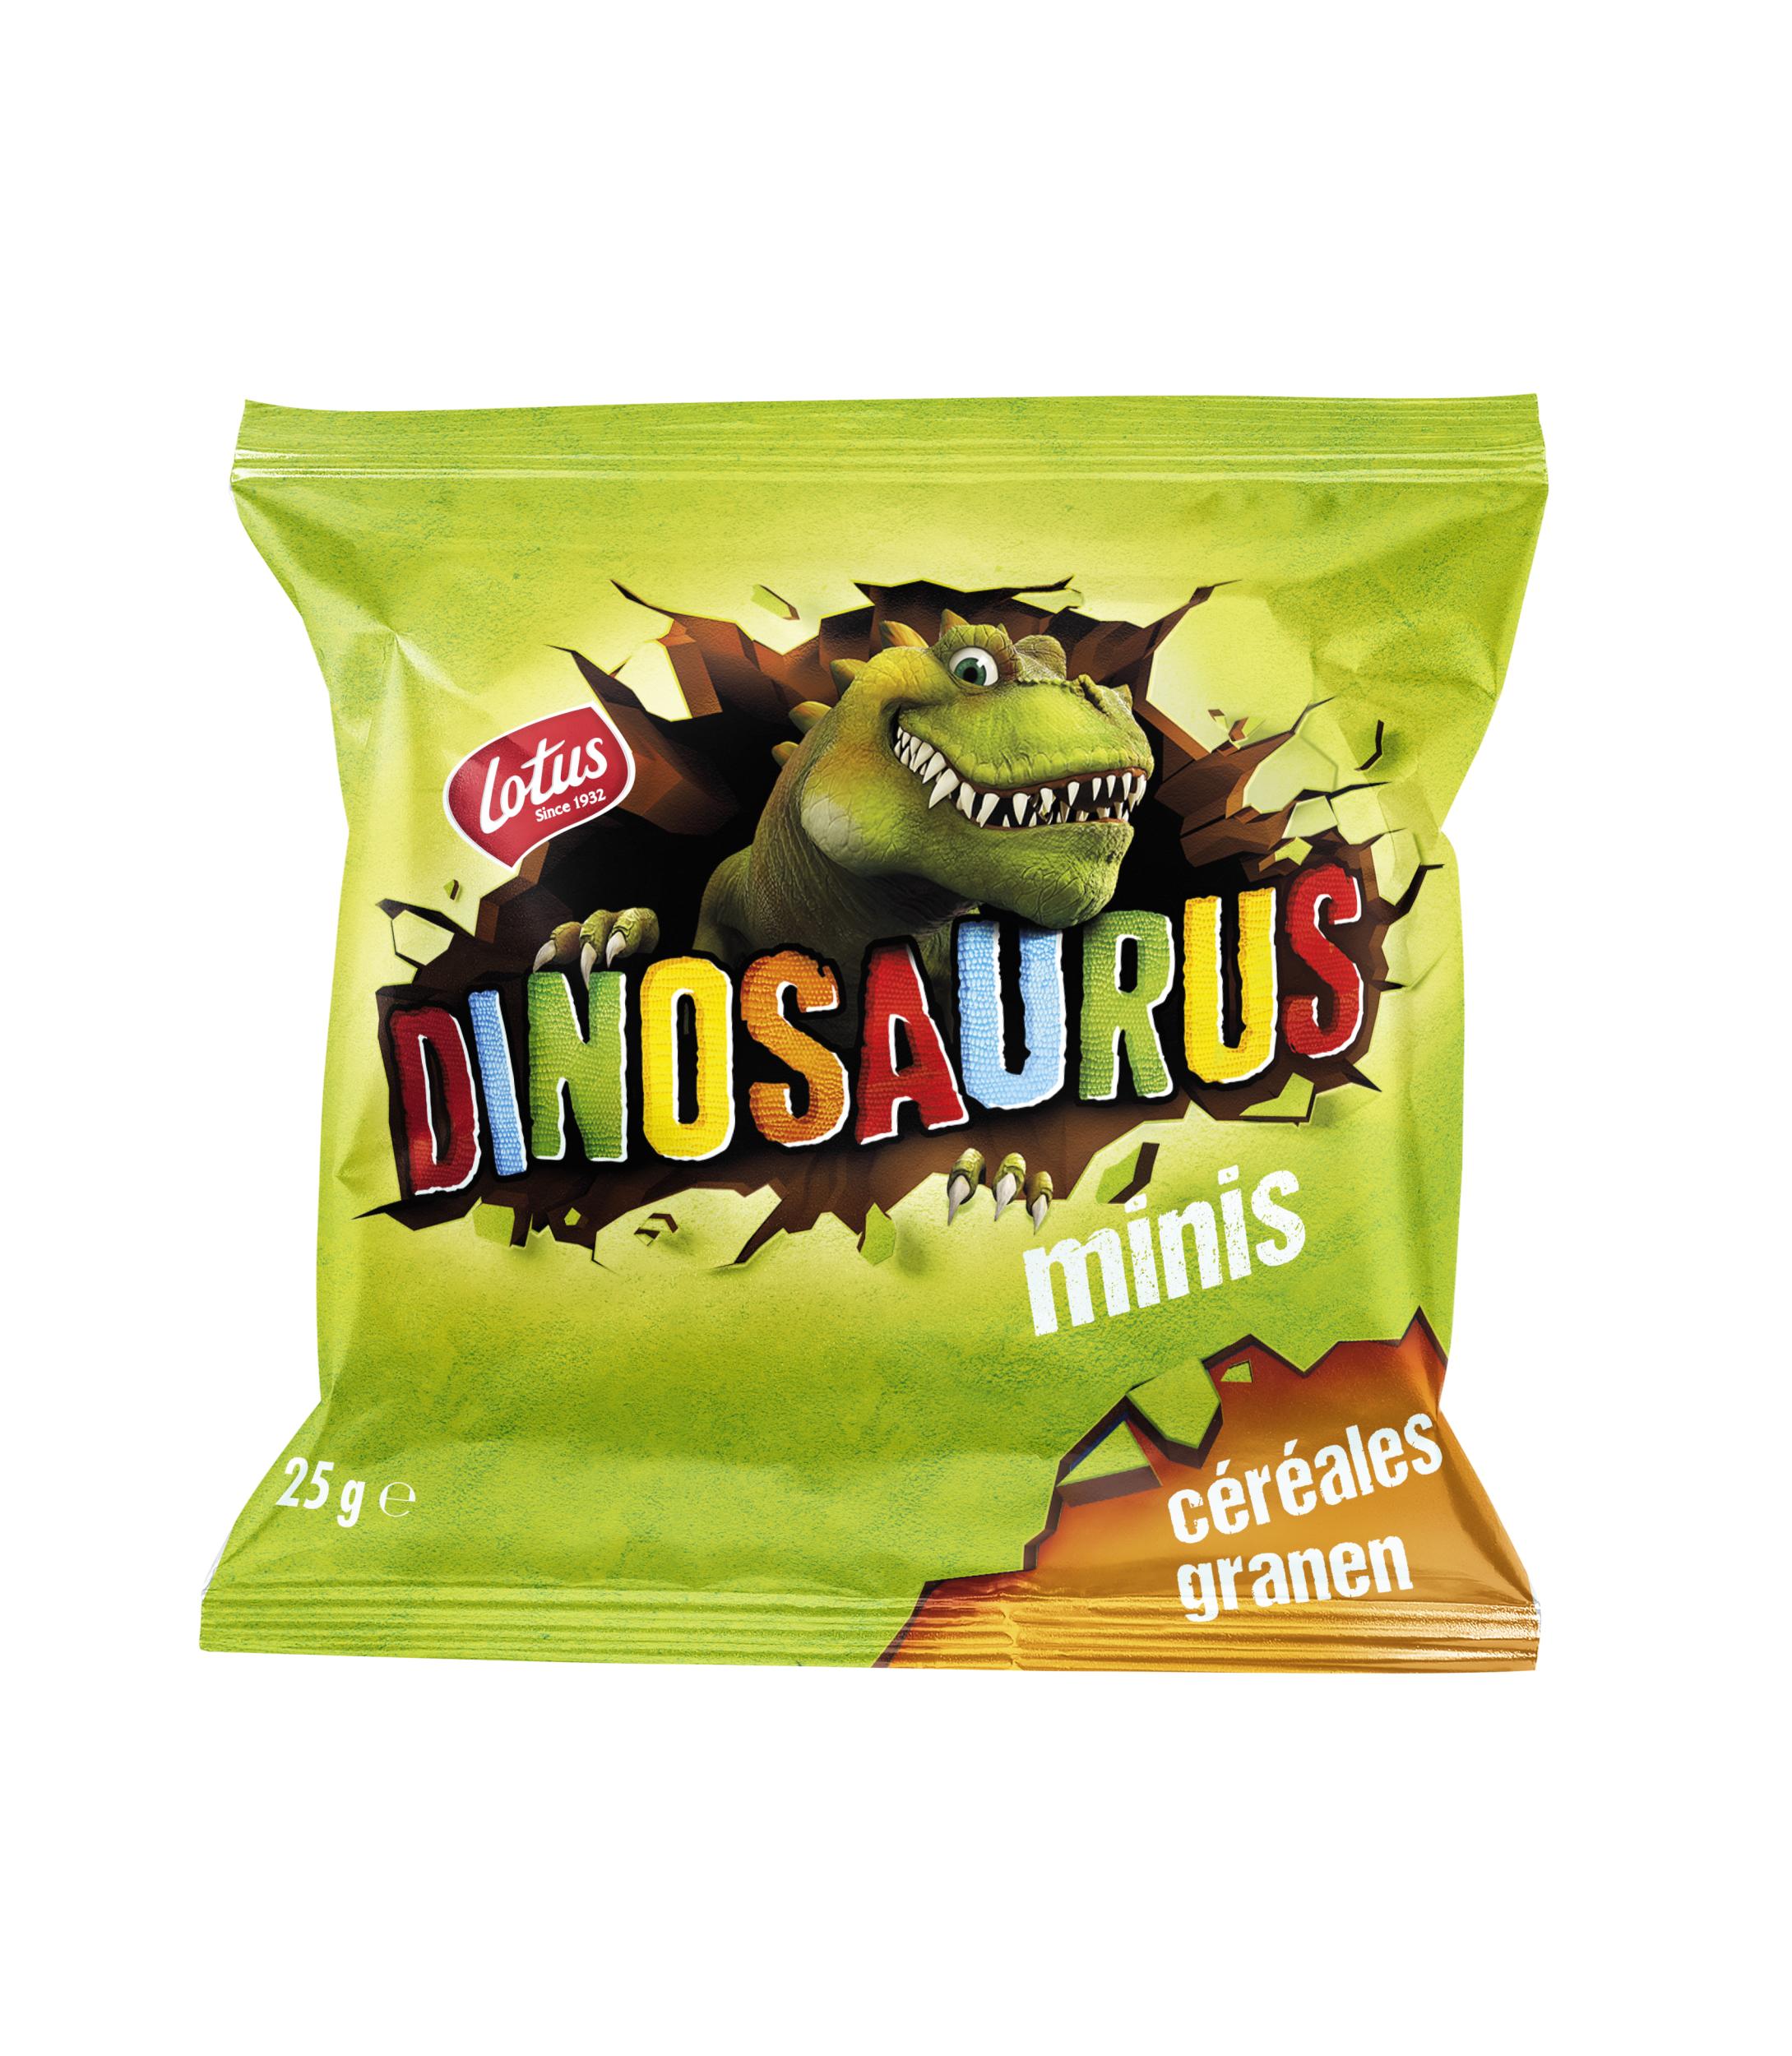 Dinosaurus Snacking Cereales 120g 12ud 1,20€